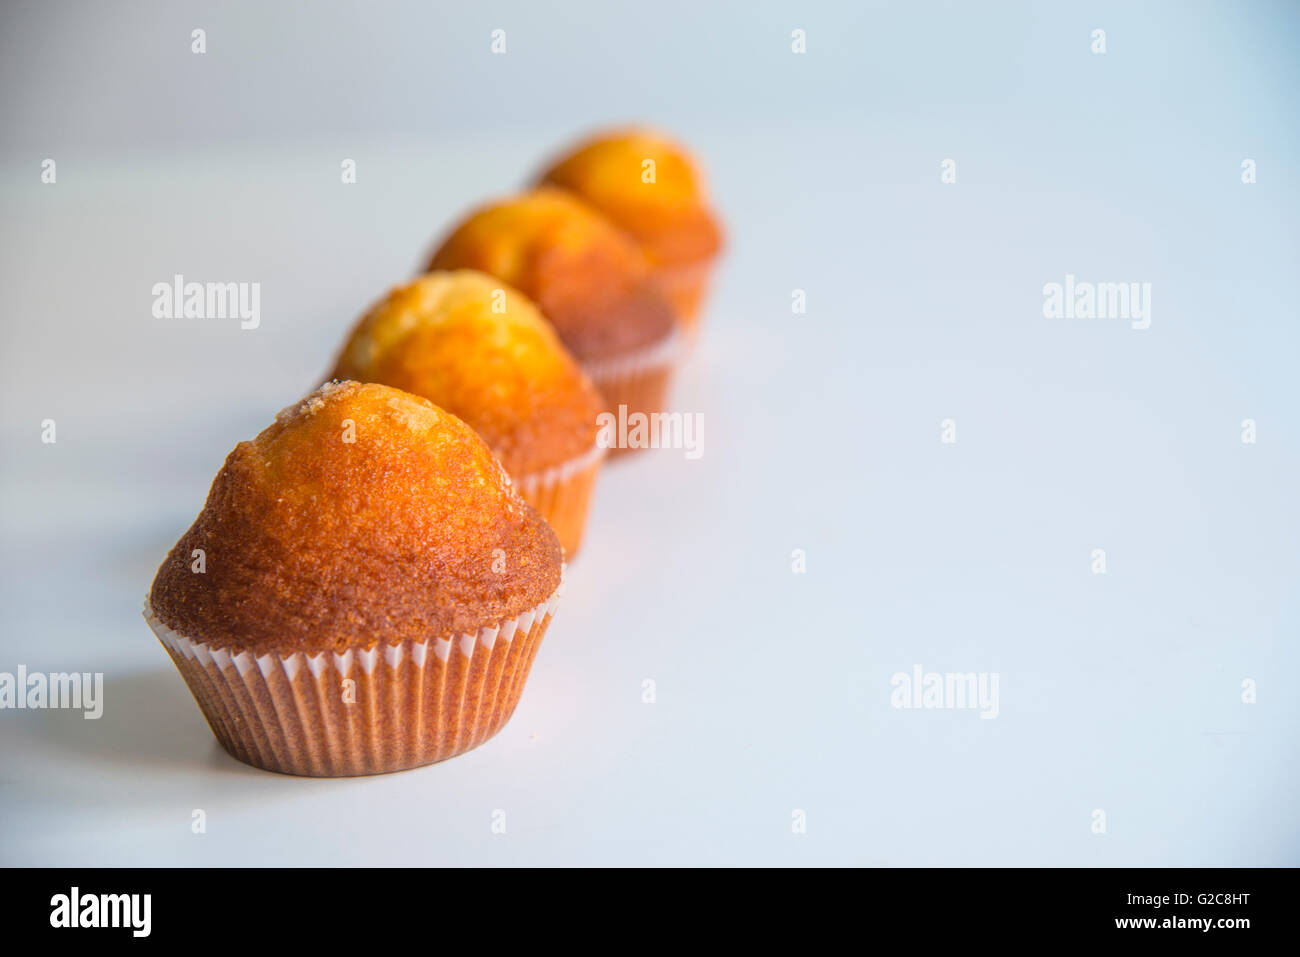 Four muffins in a row. Stock Photo